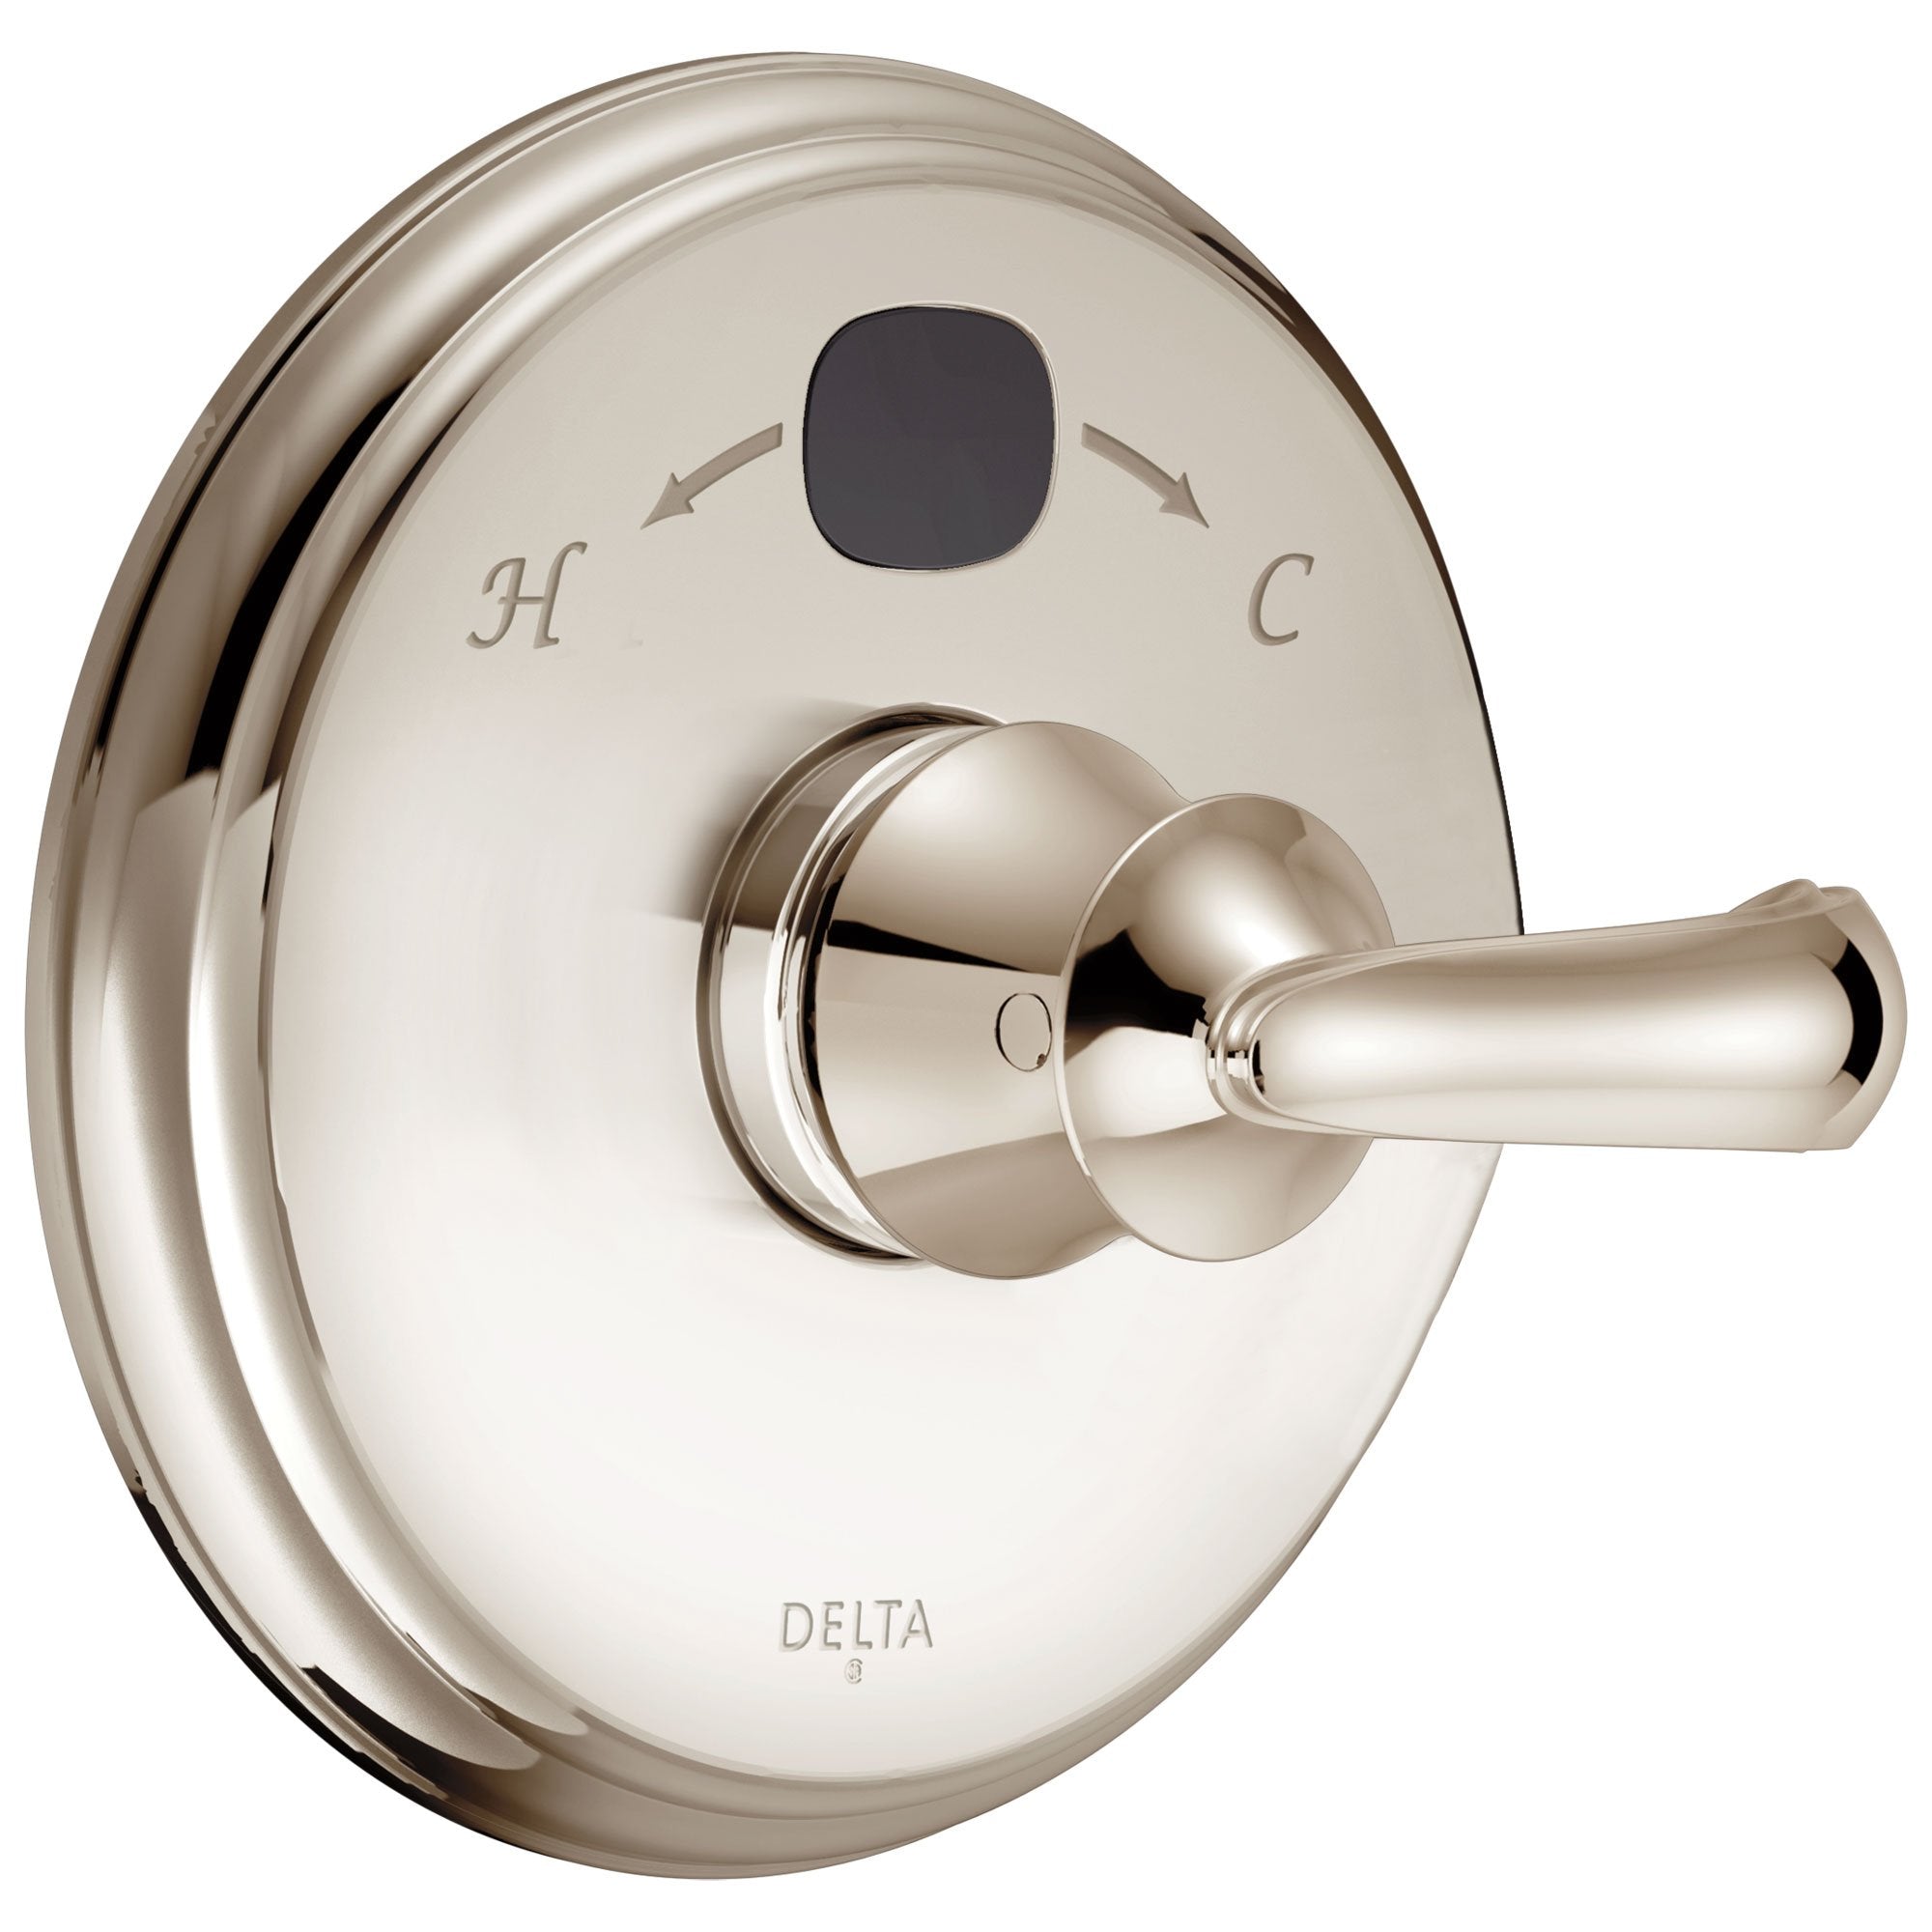 Delta Polished Nickel Cassidy 14 Series Digital Display Temp2O Shower Valve Control COMPLETE with Single French Curve Lever Handle and Valve without Stops D1680V